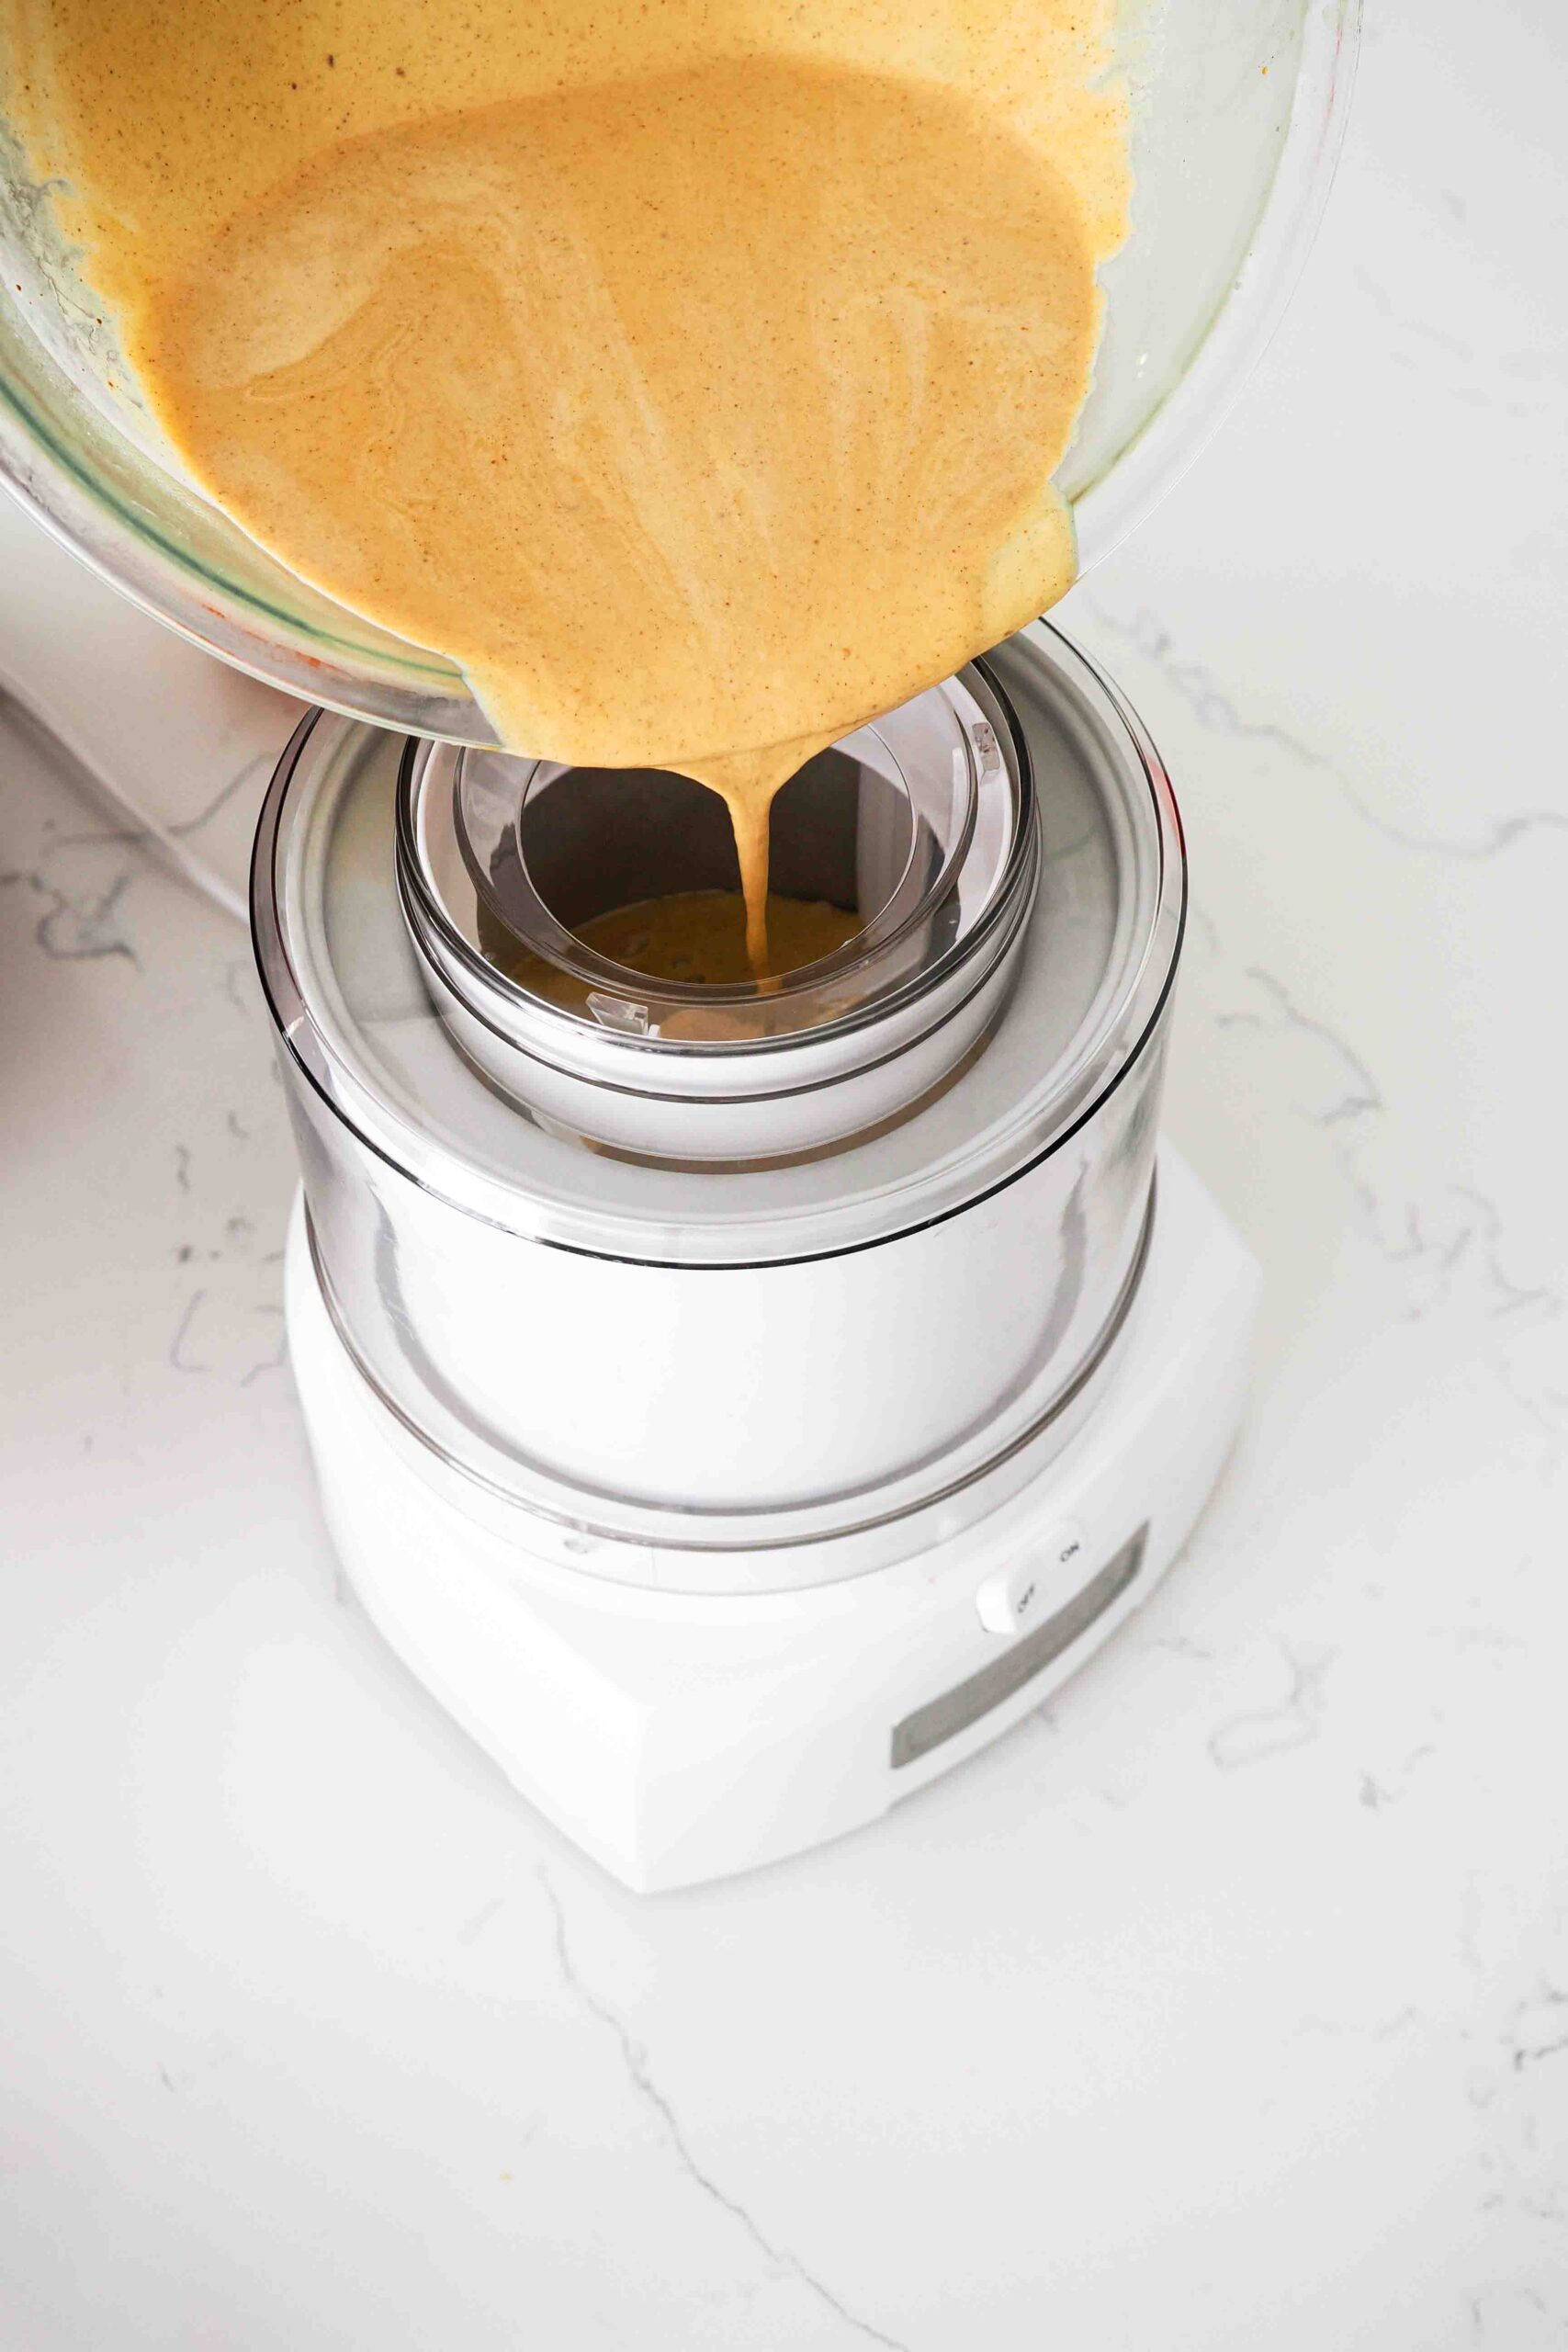 Pumpkin custard is poured into an ice cream maker canister.